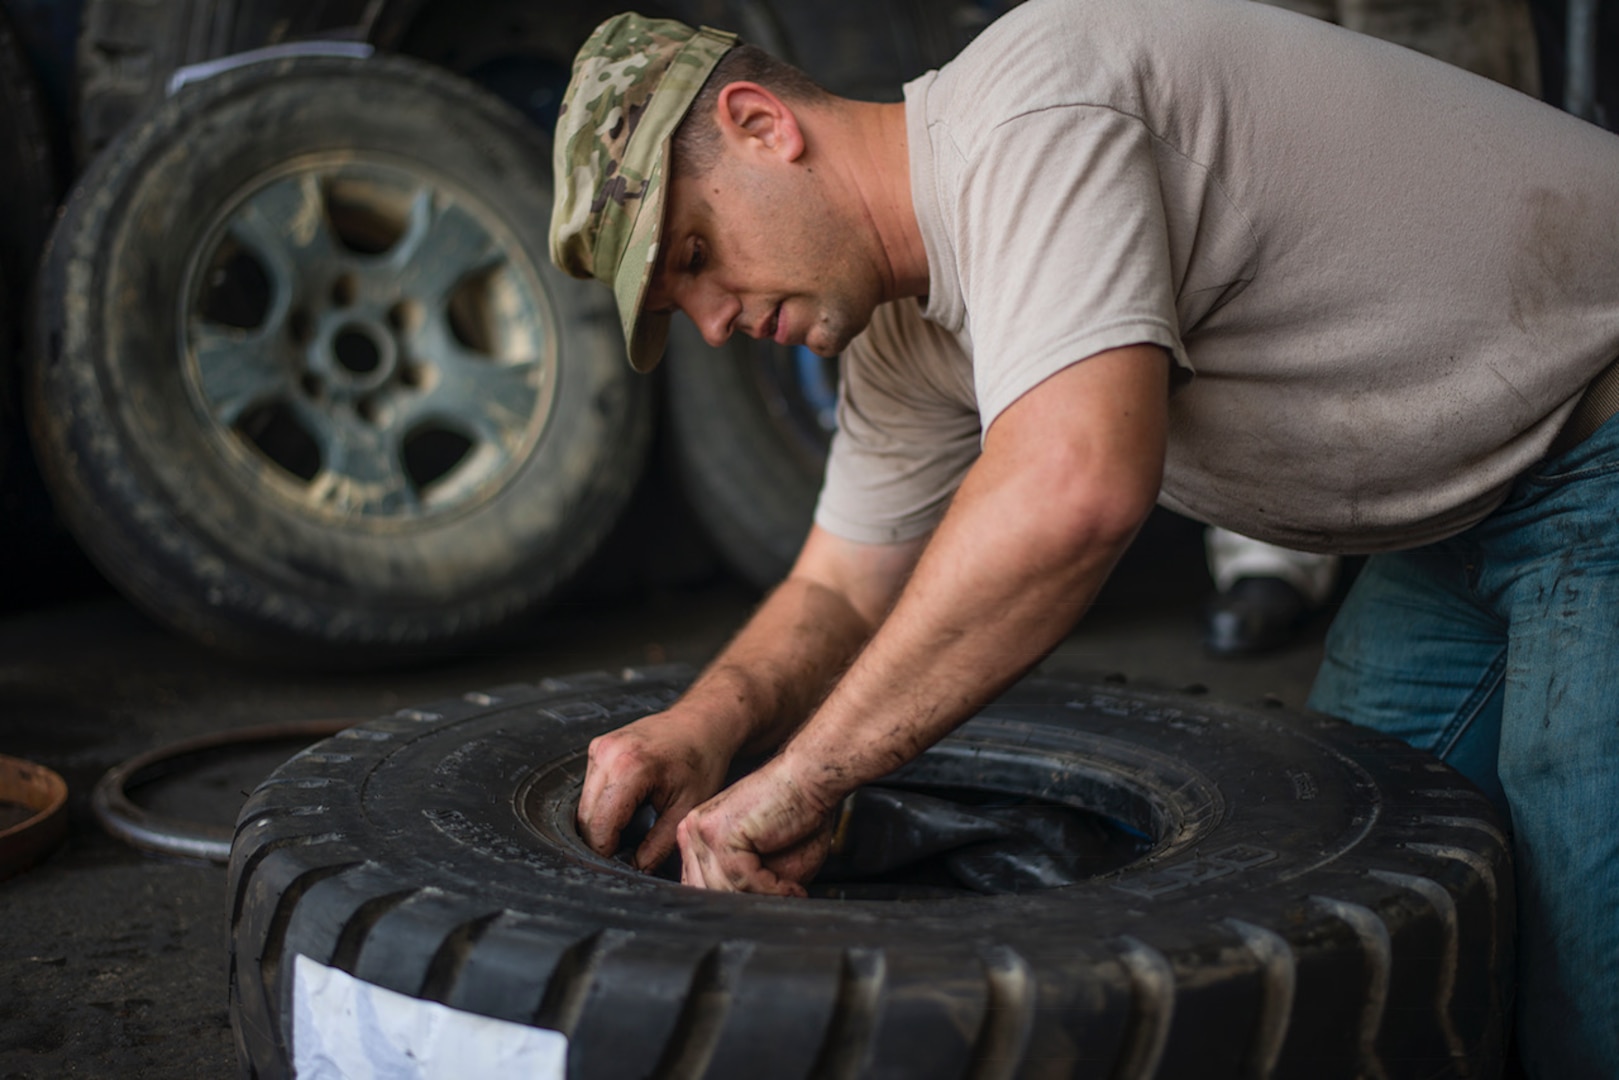 Tech. Sgt. Bryant Friend, 571st Air Mobility Advisory Squadron vehicle maintainer, changes the tires on a forklift while conducting training with the Dominican Republic Air Force in the Dominican Republic, May 3. Friend conducted the first U.S. Air Force assessment of FARD vehicle maintenance operations. He helped them make their sole forklift operational after four months out of service and regain their cargo aircraft loading capability. (U.S. Air Force photo by Staff Sgt. Heather Flitcroft)